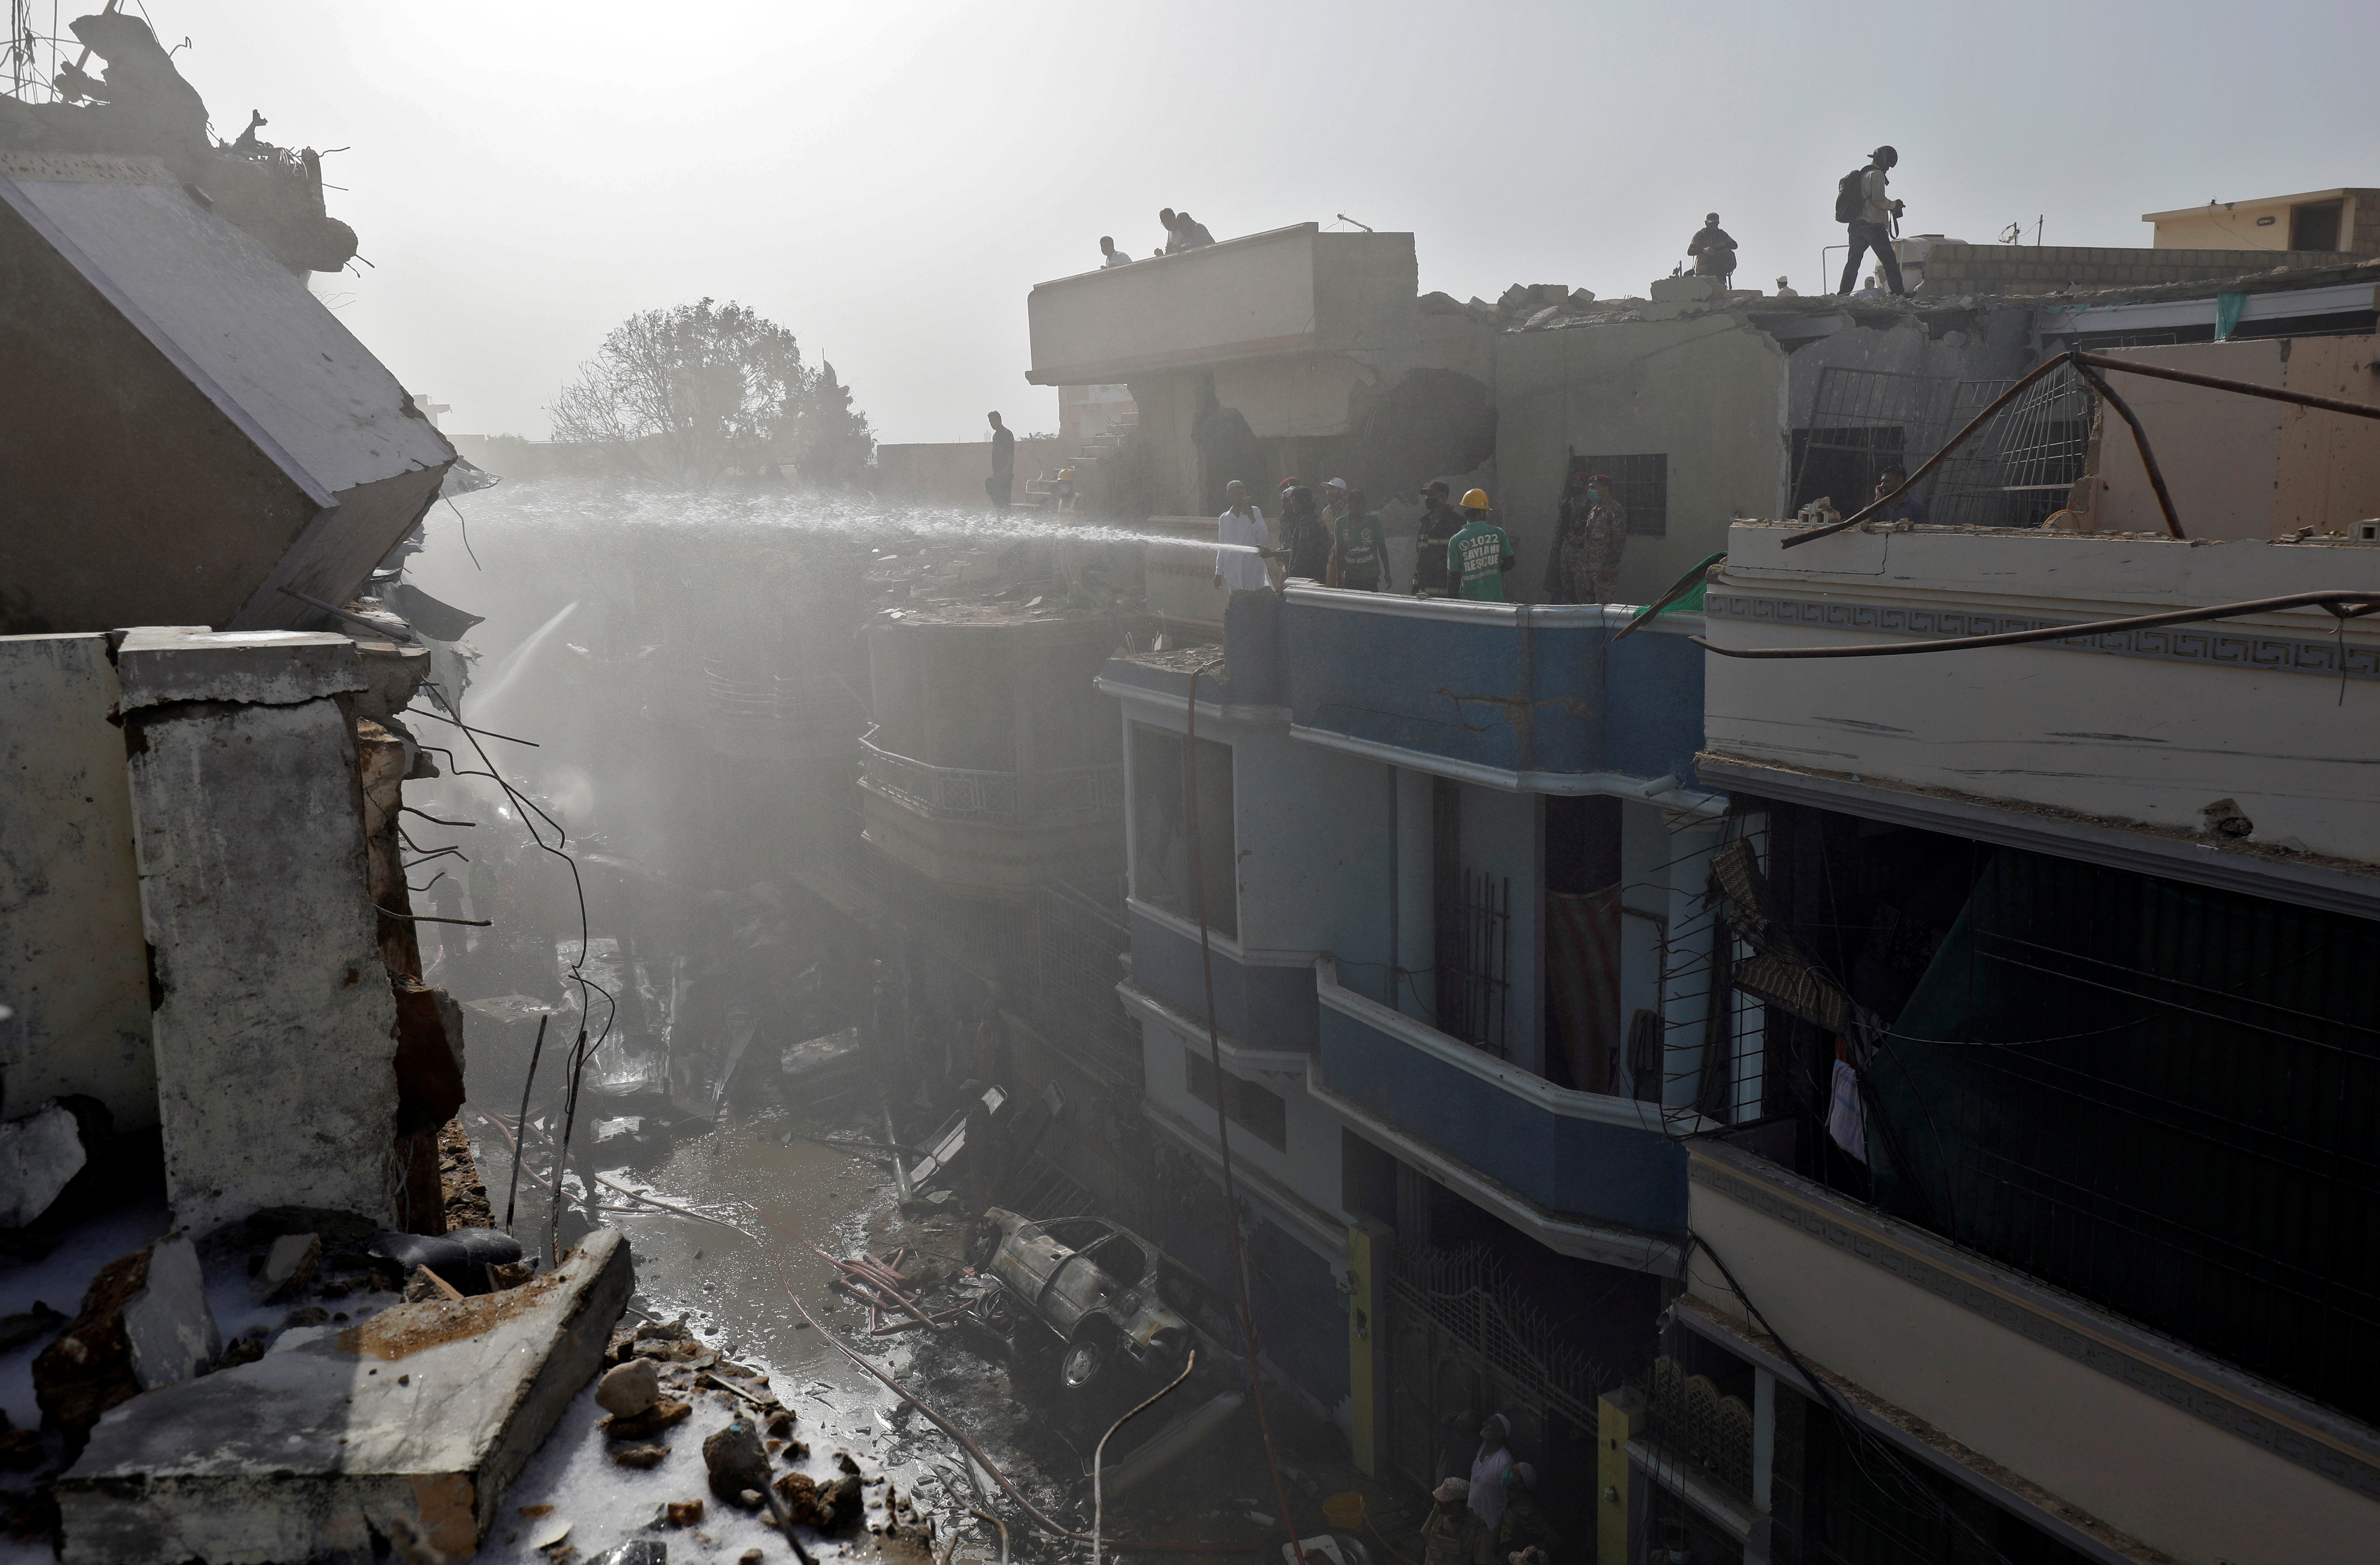 Rescue workers gather at the site of a passenger plane crash in a residential area near an airport in Karachi, Pakistan May 22, 2020. Photo: Reuters